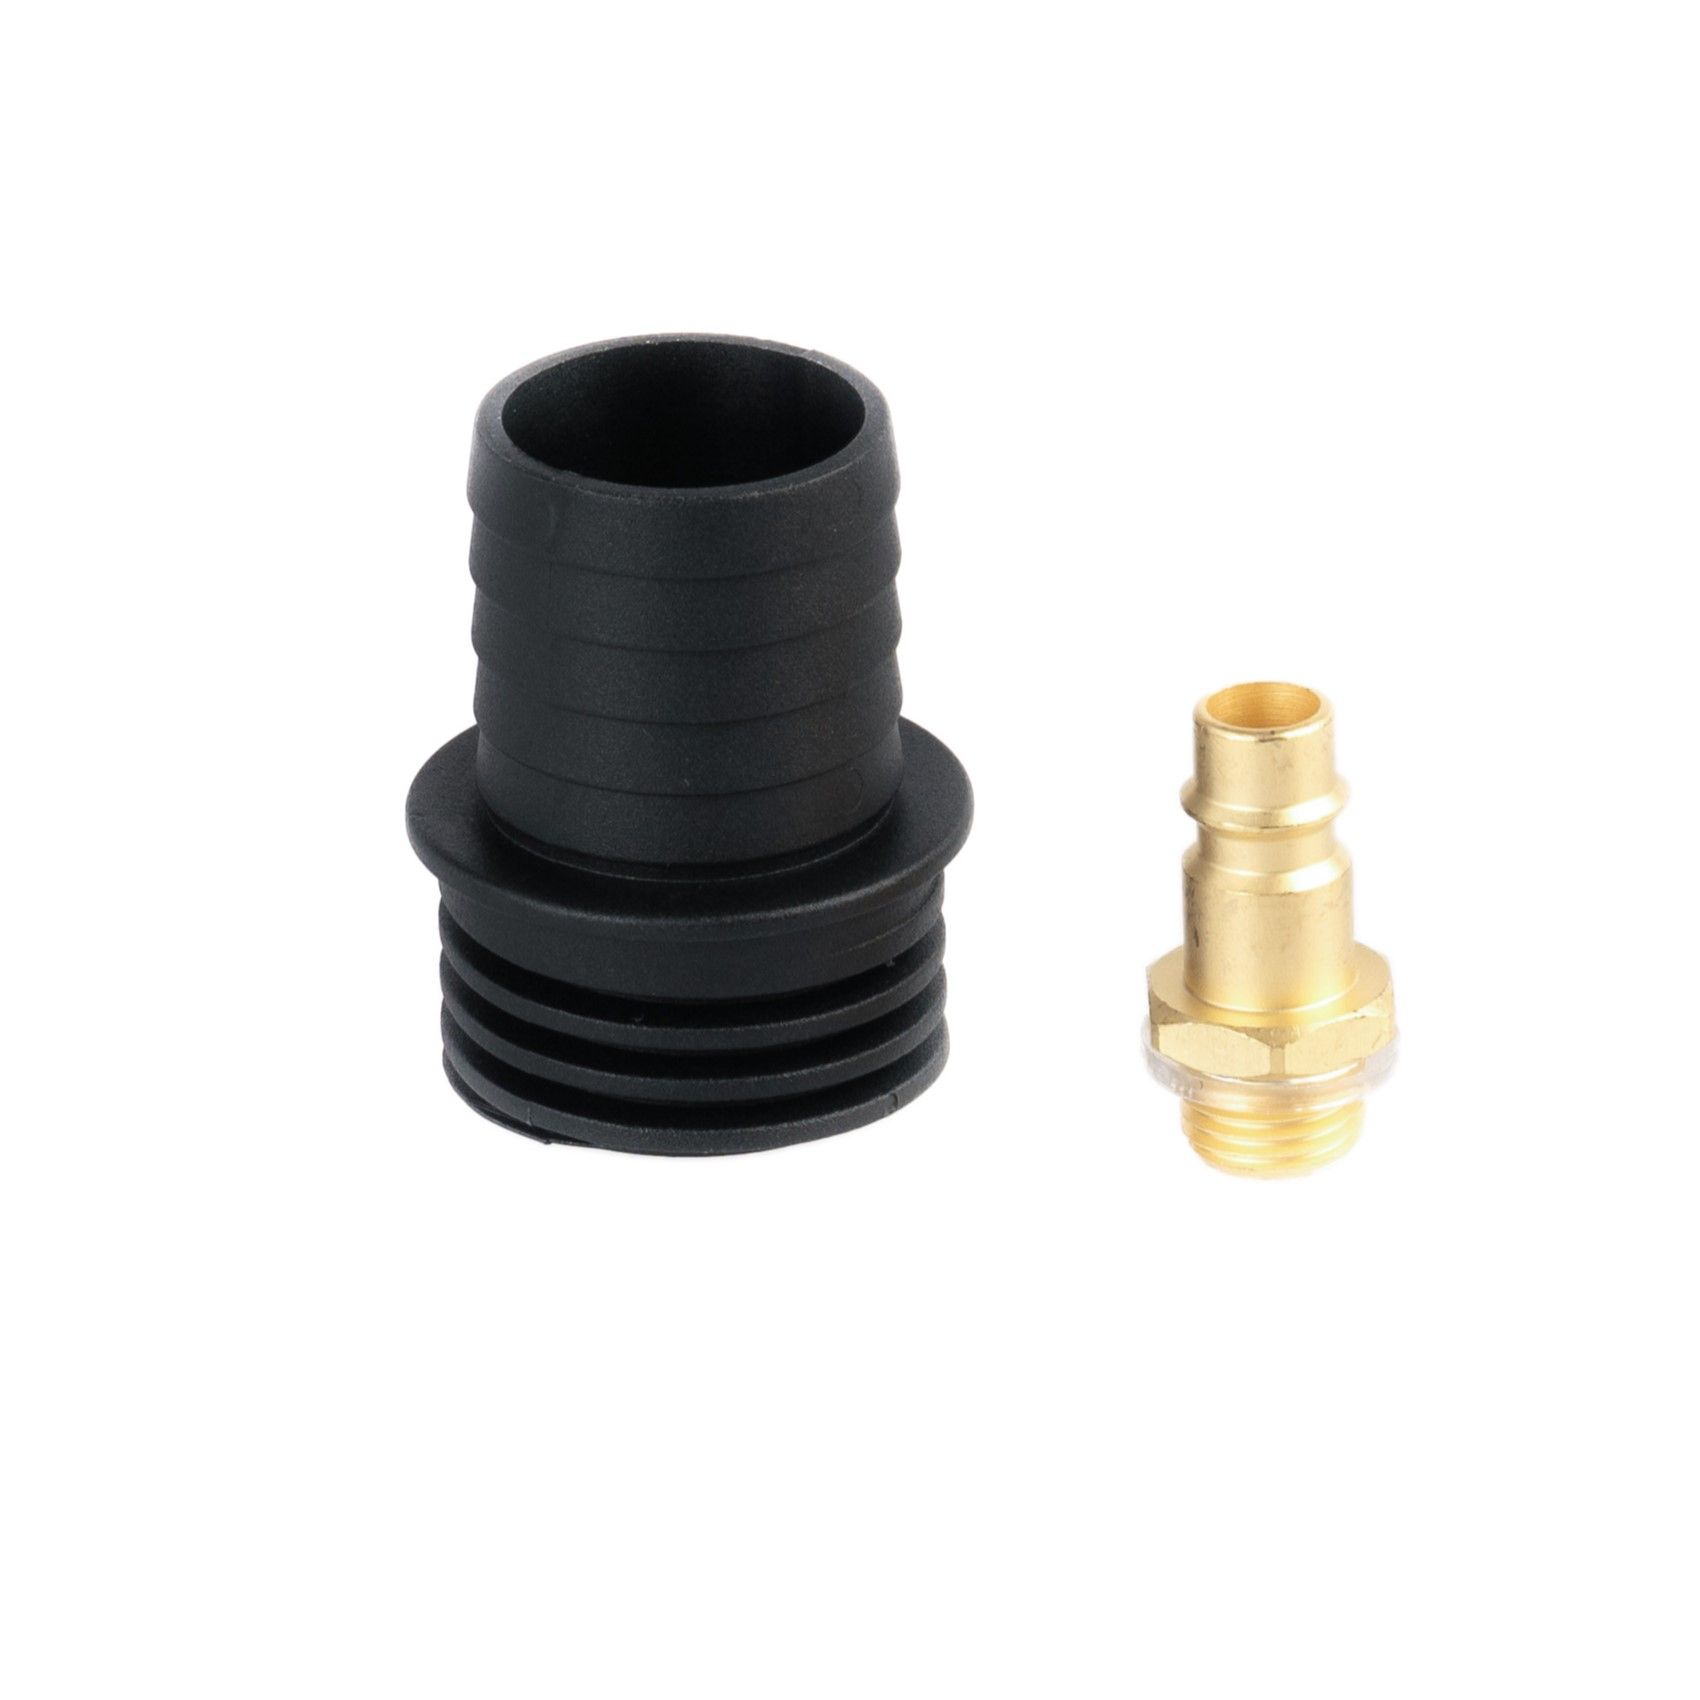 Nippel/Adapter Kit for ROS